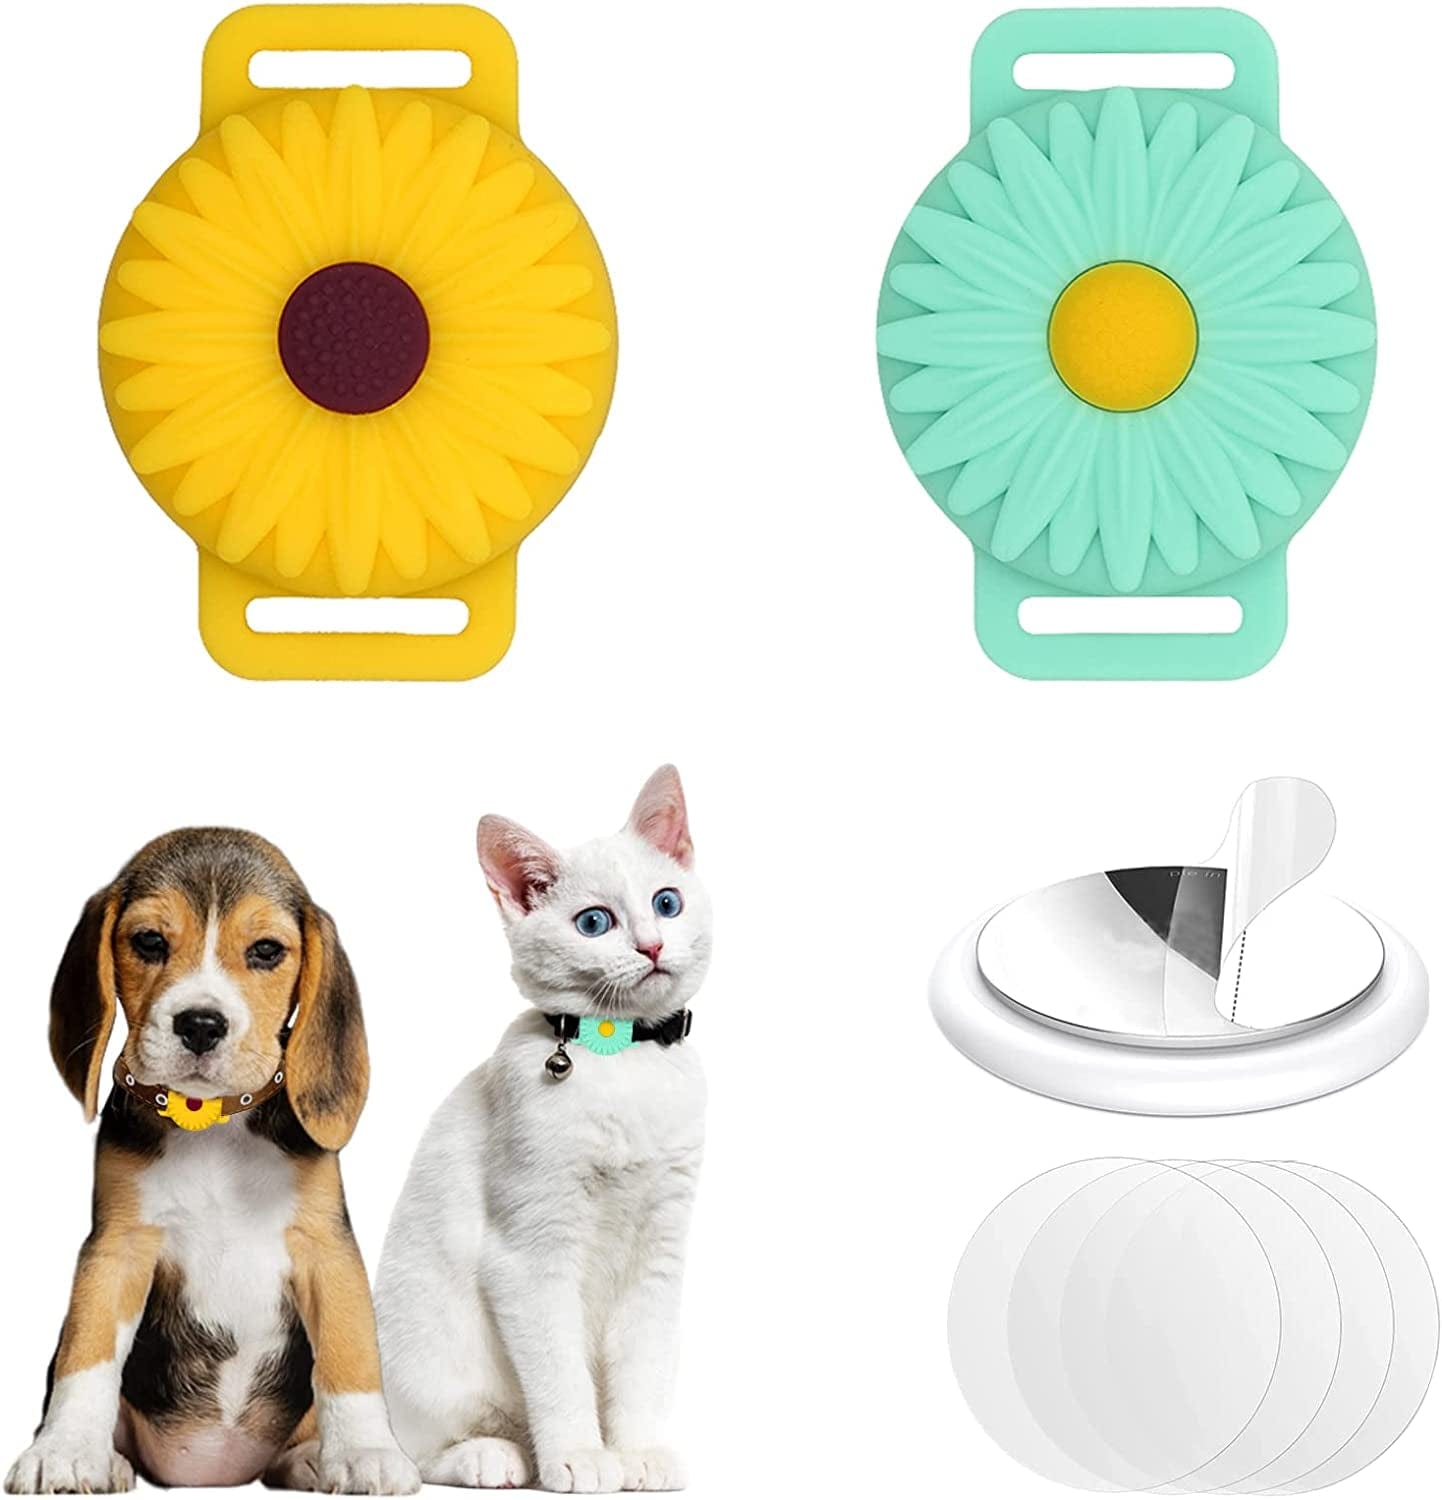 3-Pack Airtag Cat Collar Holder for Apple Airtag 2021, Silicone Airtag Protective Case for Puppy Collar, Anti-Lost Airtag Dog Collar Holder with Screen Protectors Electronics > GPS Accessories > GPS Cases Fretime Sunflower - Yellow & Mint Green Suitable for collar up to 0.7 inch wide 